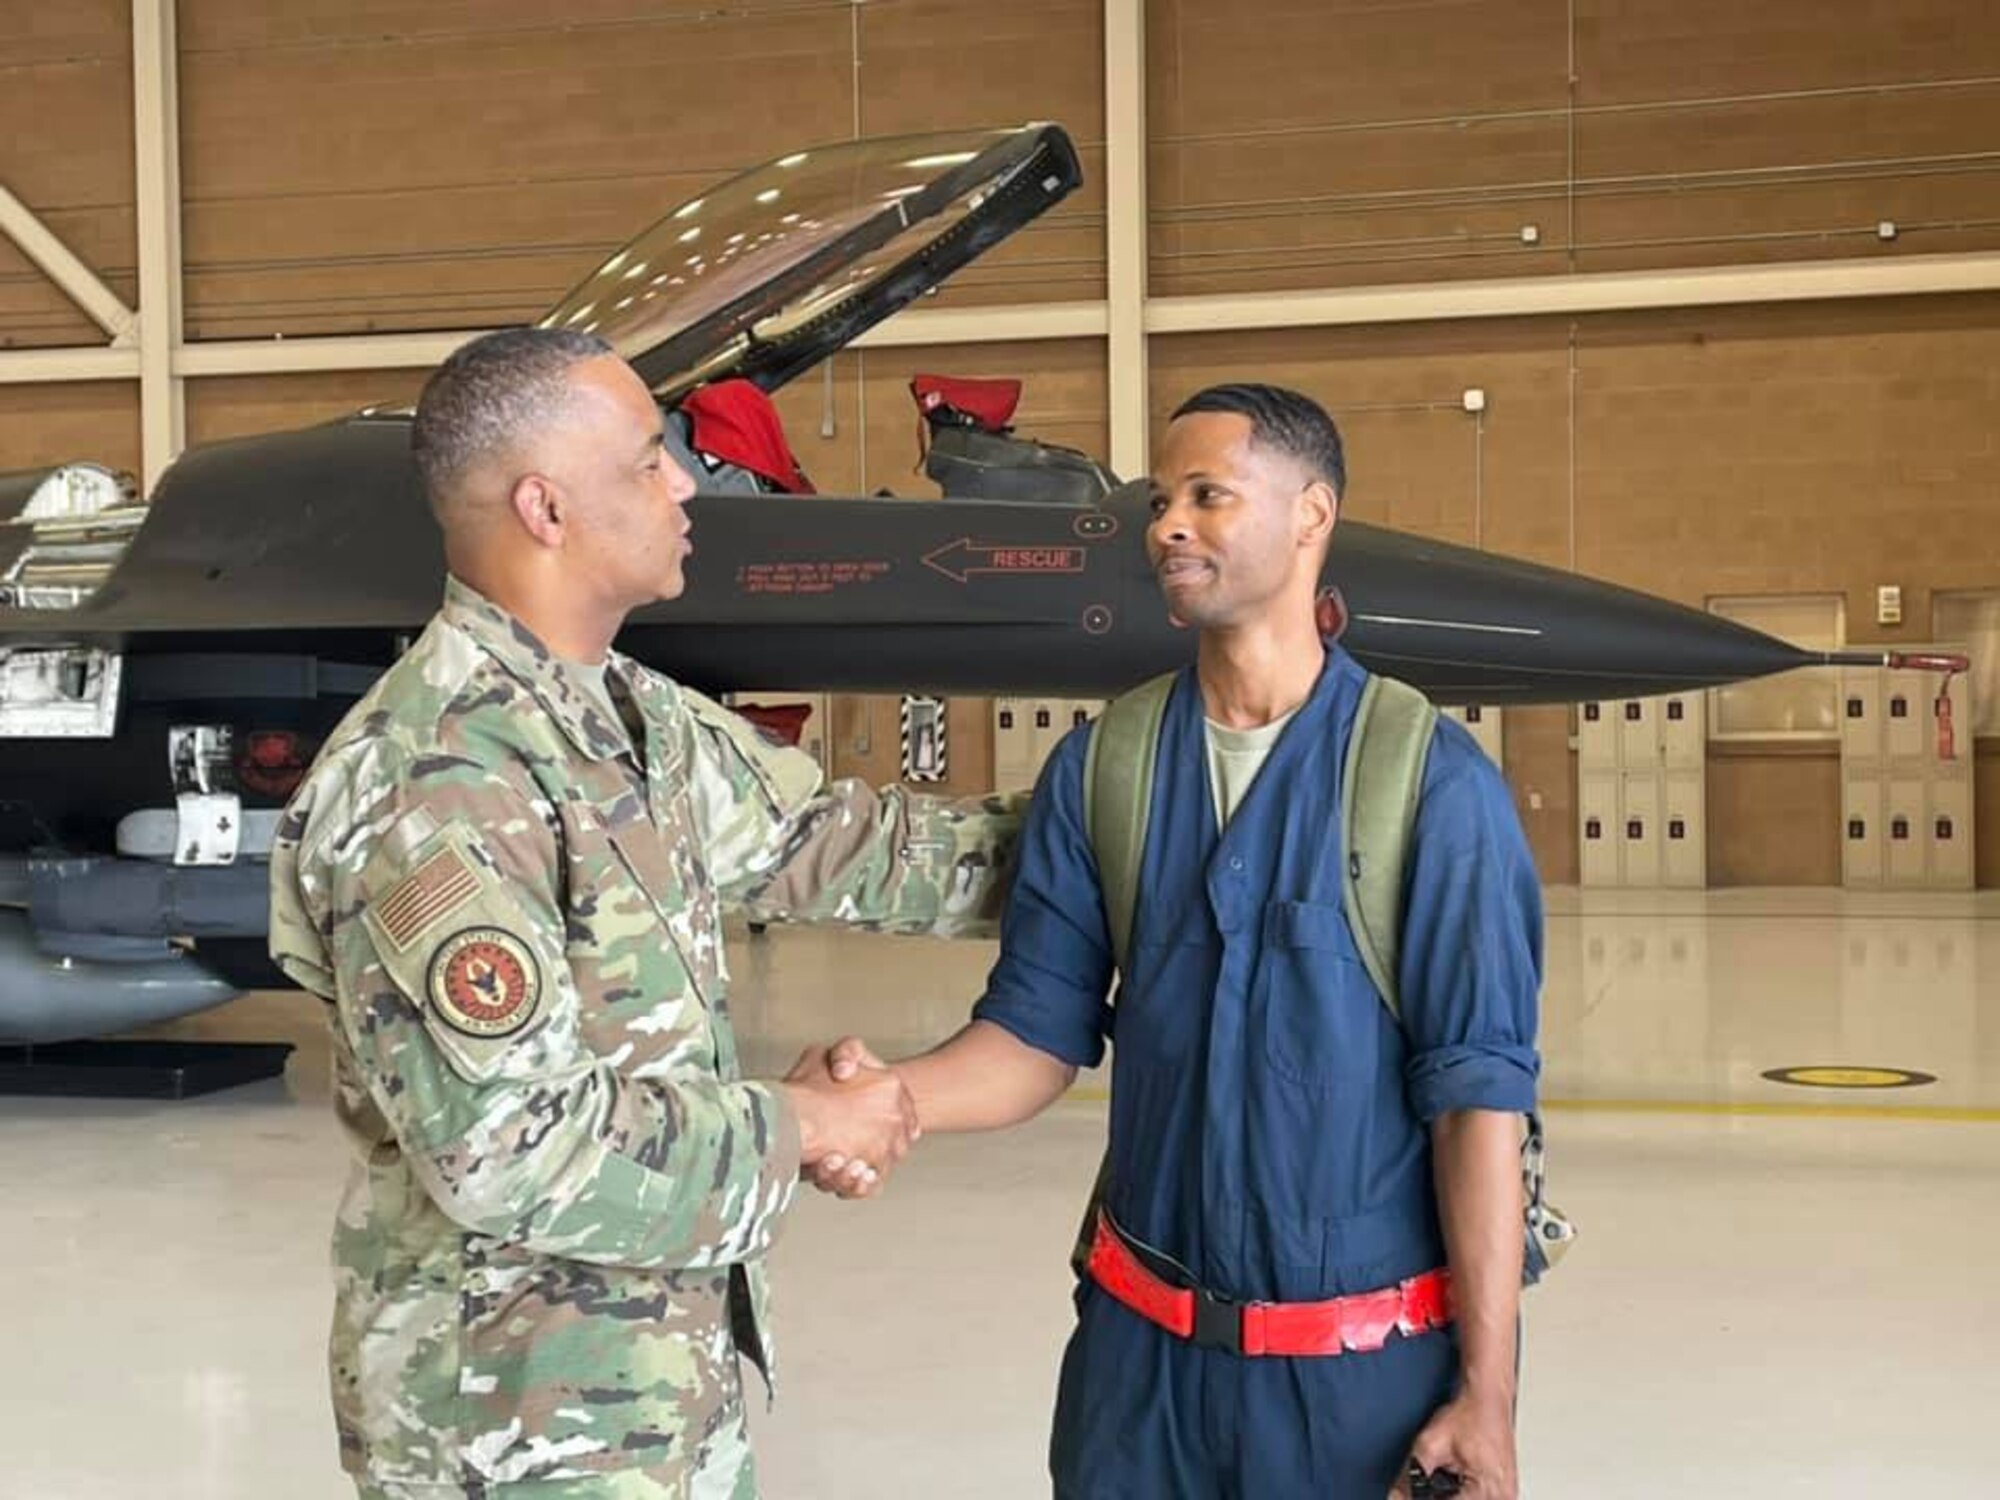 Chief Master Sgt. Timothy White, Senior Enlisted Advisor to the Chief of Air Force Reserve and Command Chief Master Sergeant of Air Force Reserve Command, greets Staff Sgt. Aaron Raiford, 926th Aircraft Maintenance Squadron, during a visit to the 926th Wing, June 16, at Nellis Air Force Base, Nevada. White is visiting as part of the Reserve Senior Enlisted Council hosted by 10th Air Force. (U.S. Air Force photo by Natalie Stanley)